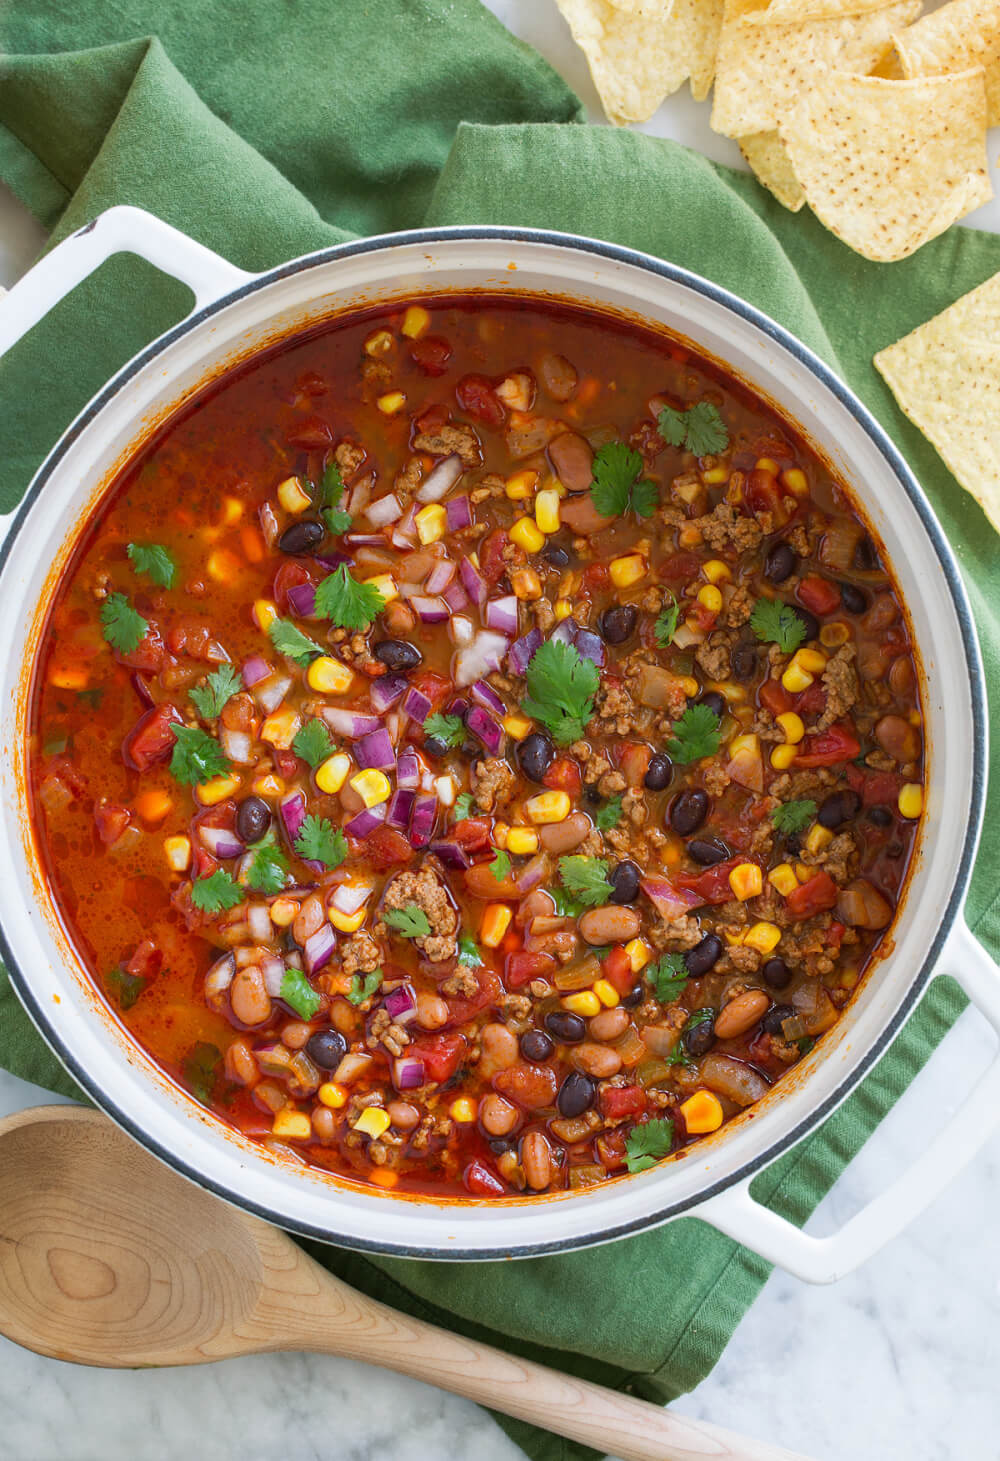 In Budget Bean Recipes, this is Taco Soup